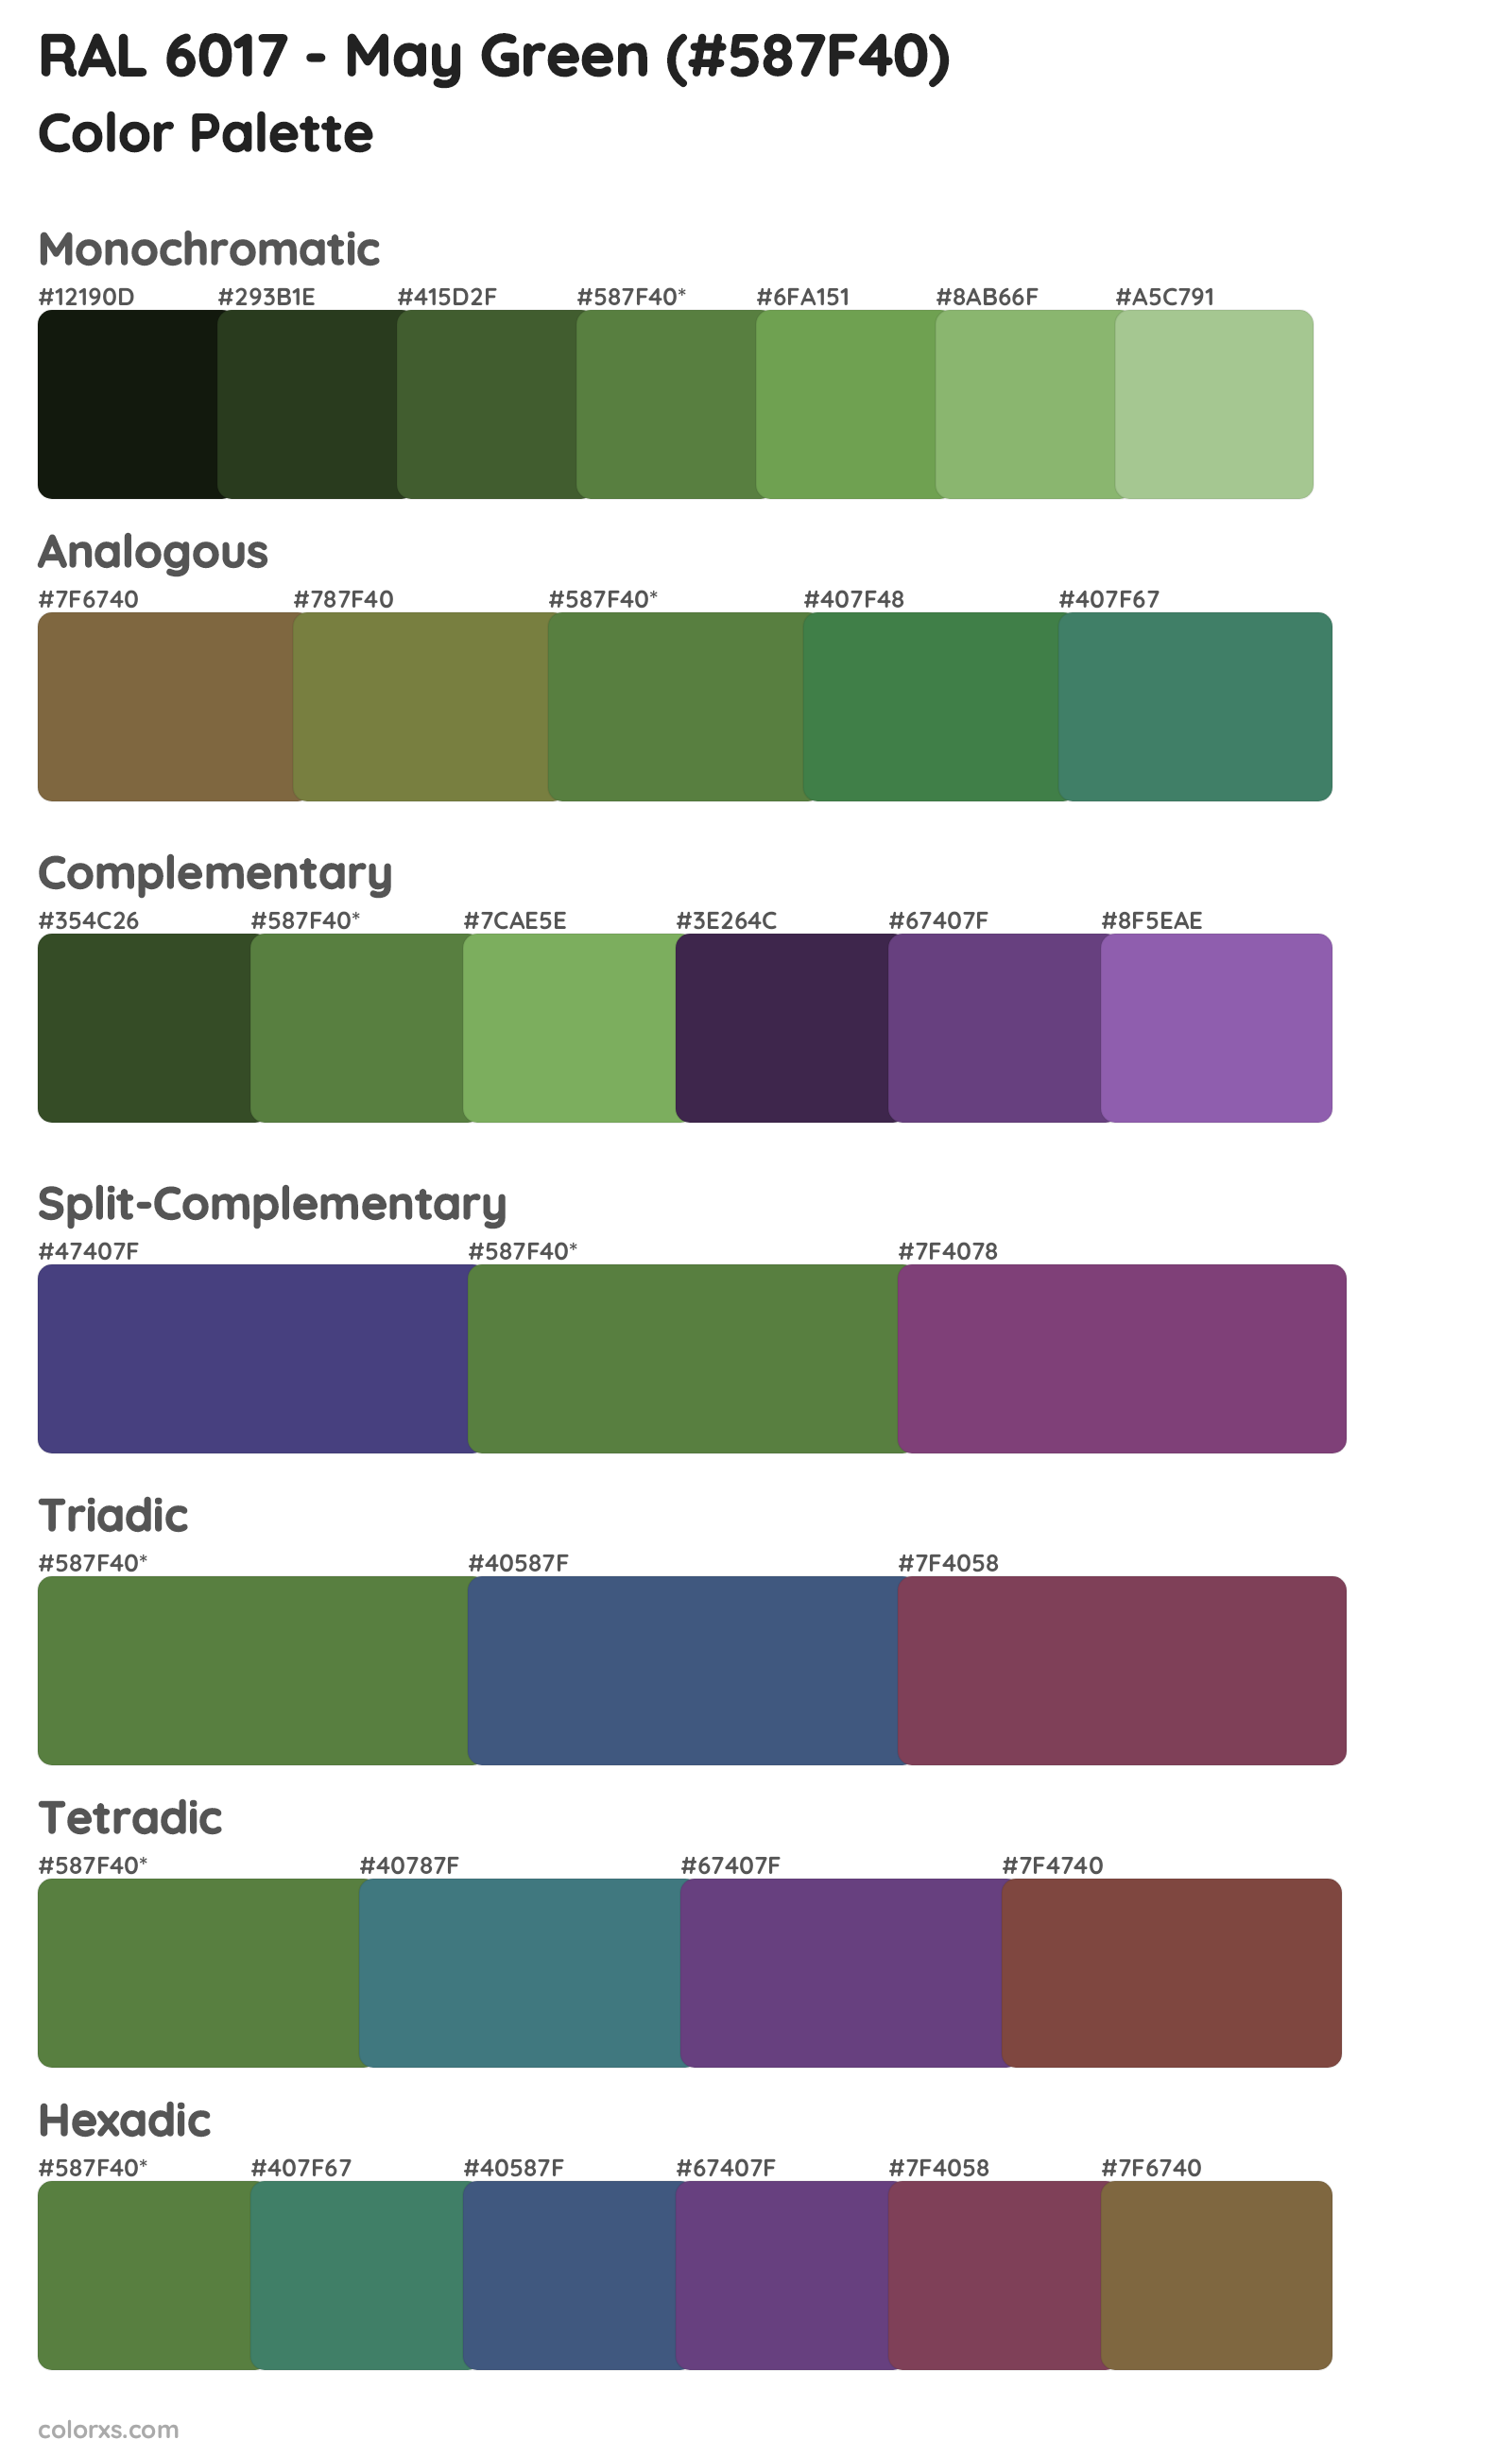 RAL 6017 - May Green Color Scheme Palettes